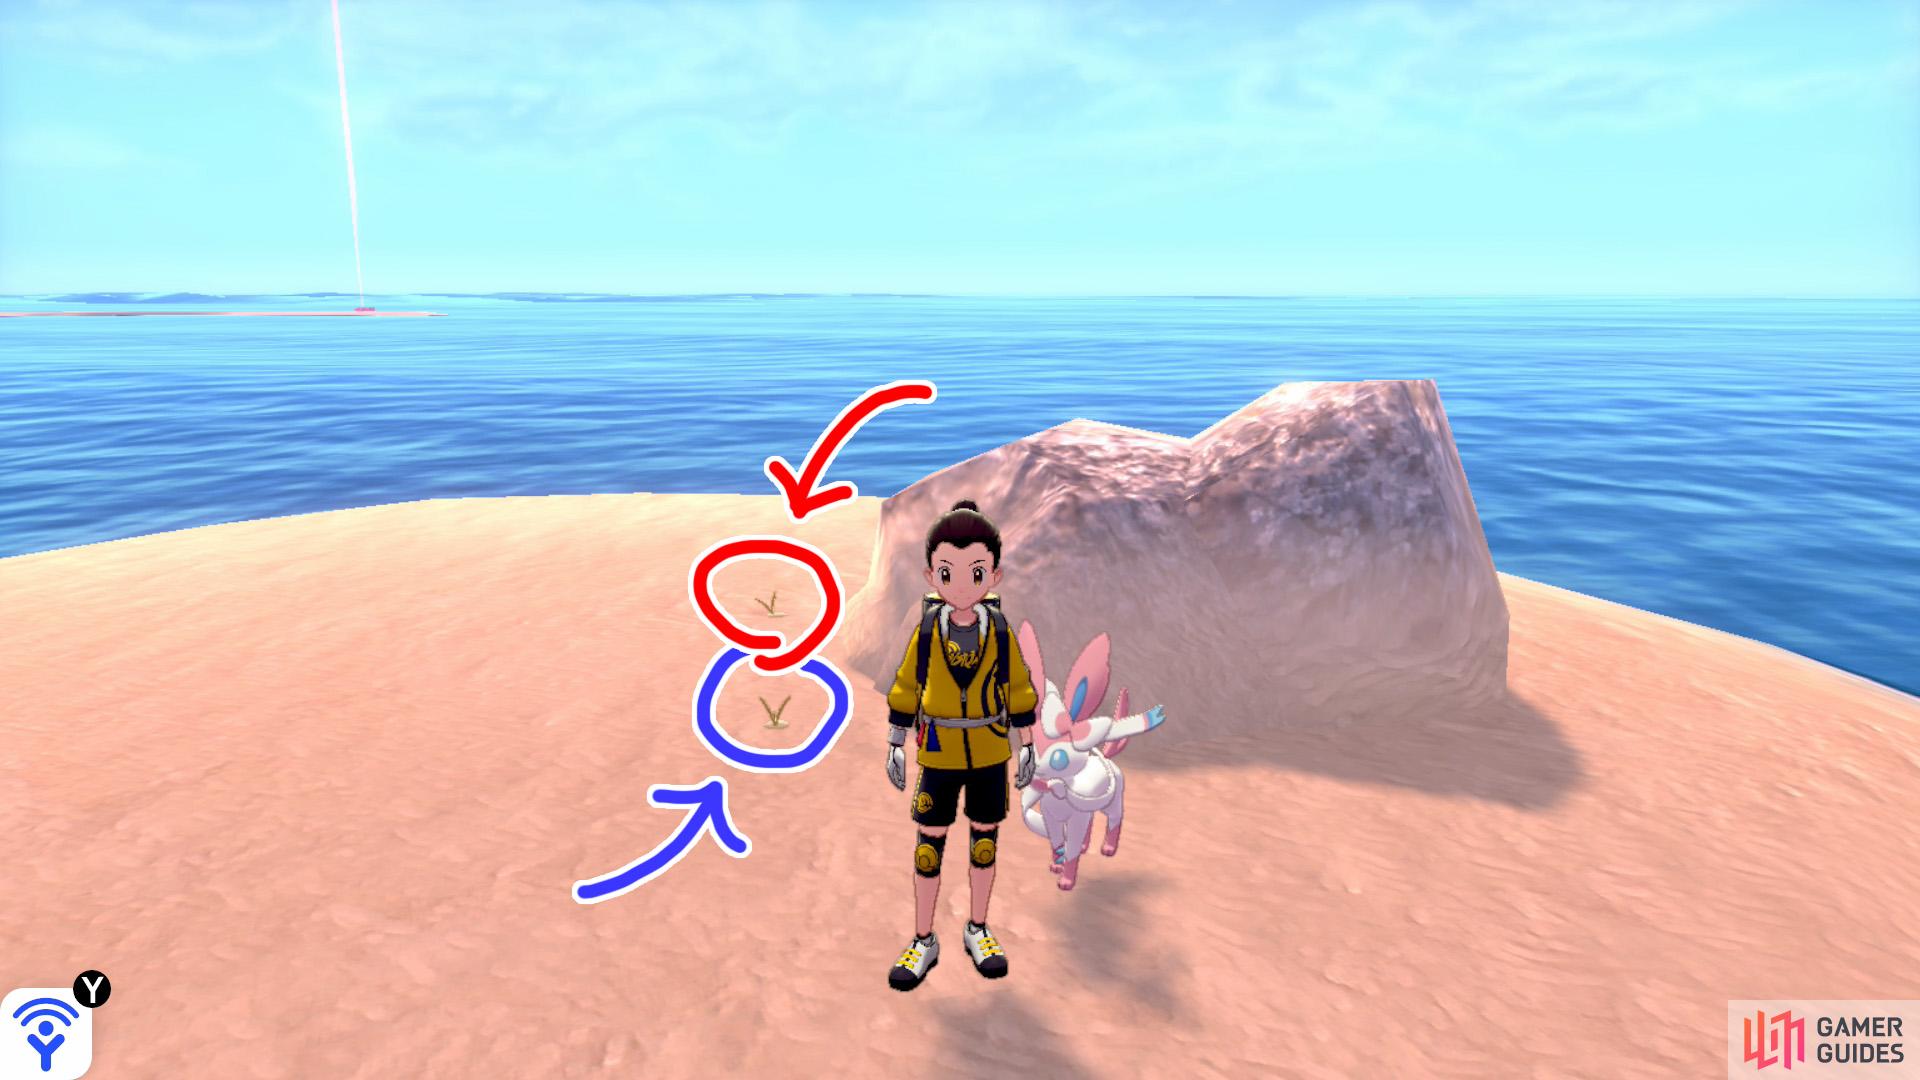 5/7 and 5/6: From the island where Diglett 1~4 are, head for the shore and face the elongated pair of islands (on the right, if you're facing the mainland). To the left of the pair of islands is an islet that has a boulder (it might look like a blob from here). Swim to the islet. Search to the left of the boulder to find two Diglett.